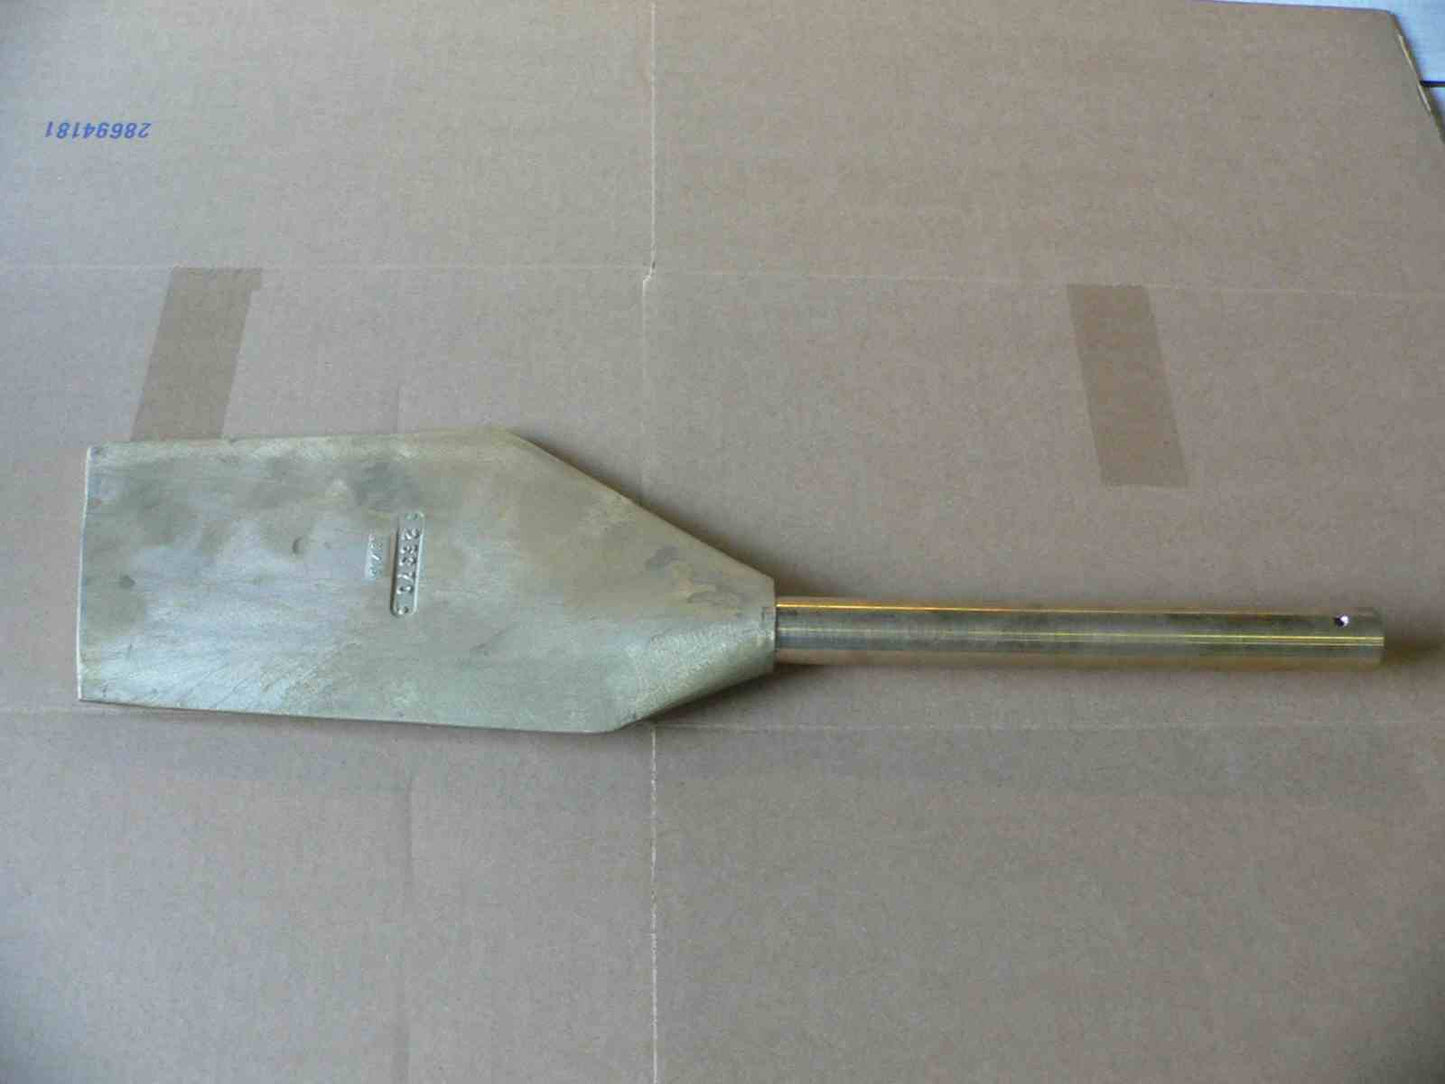 Rudder. Casting # 26370, Sea Ray Part # 161042 - Fits a 1994 Sea Ray 370DA and other models